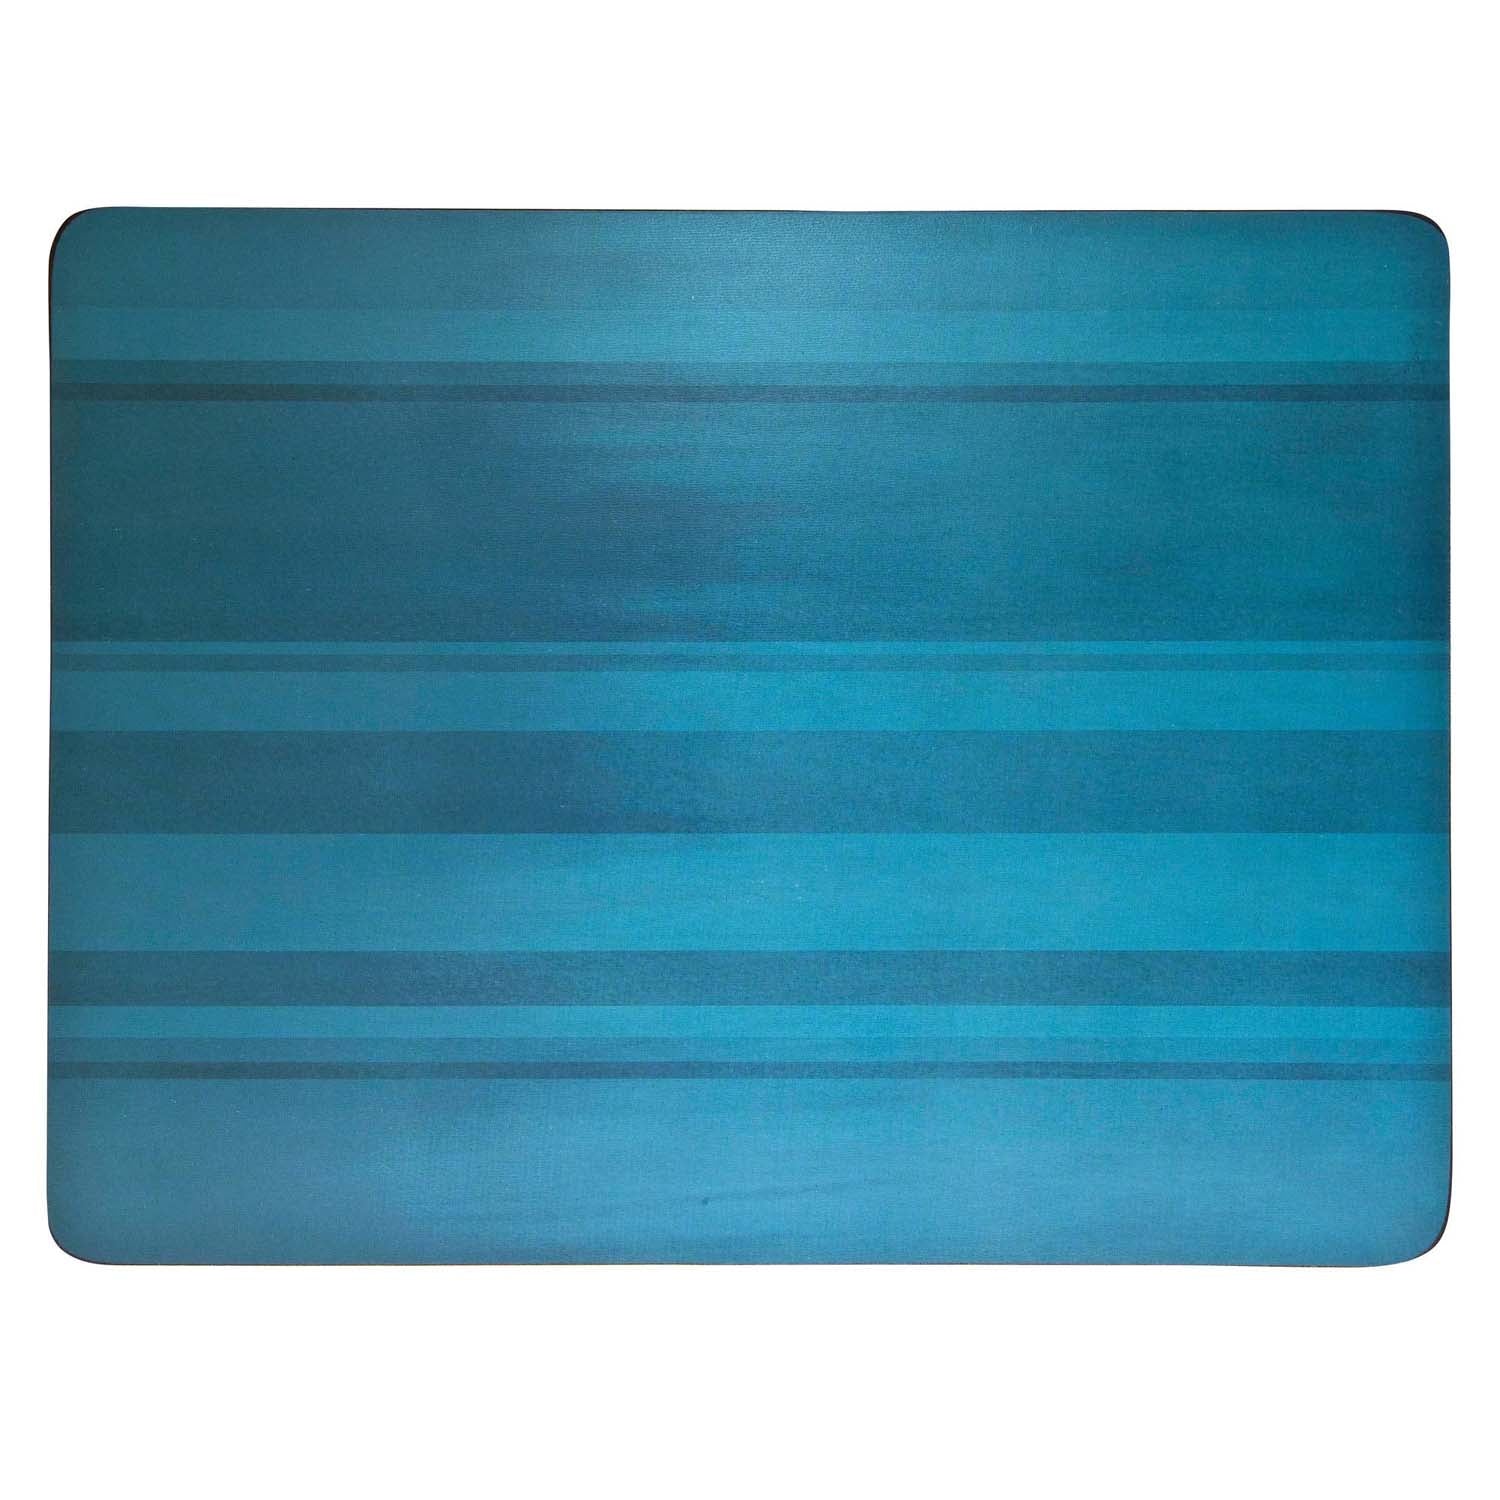 Denby Placemats - Turquoise - Set of 6 1 Shaws Department Stores